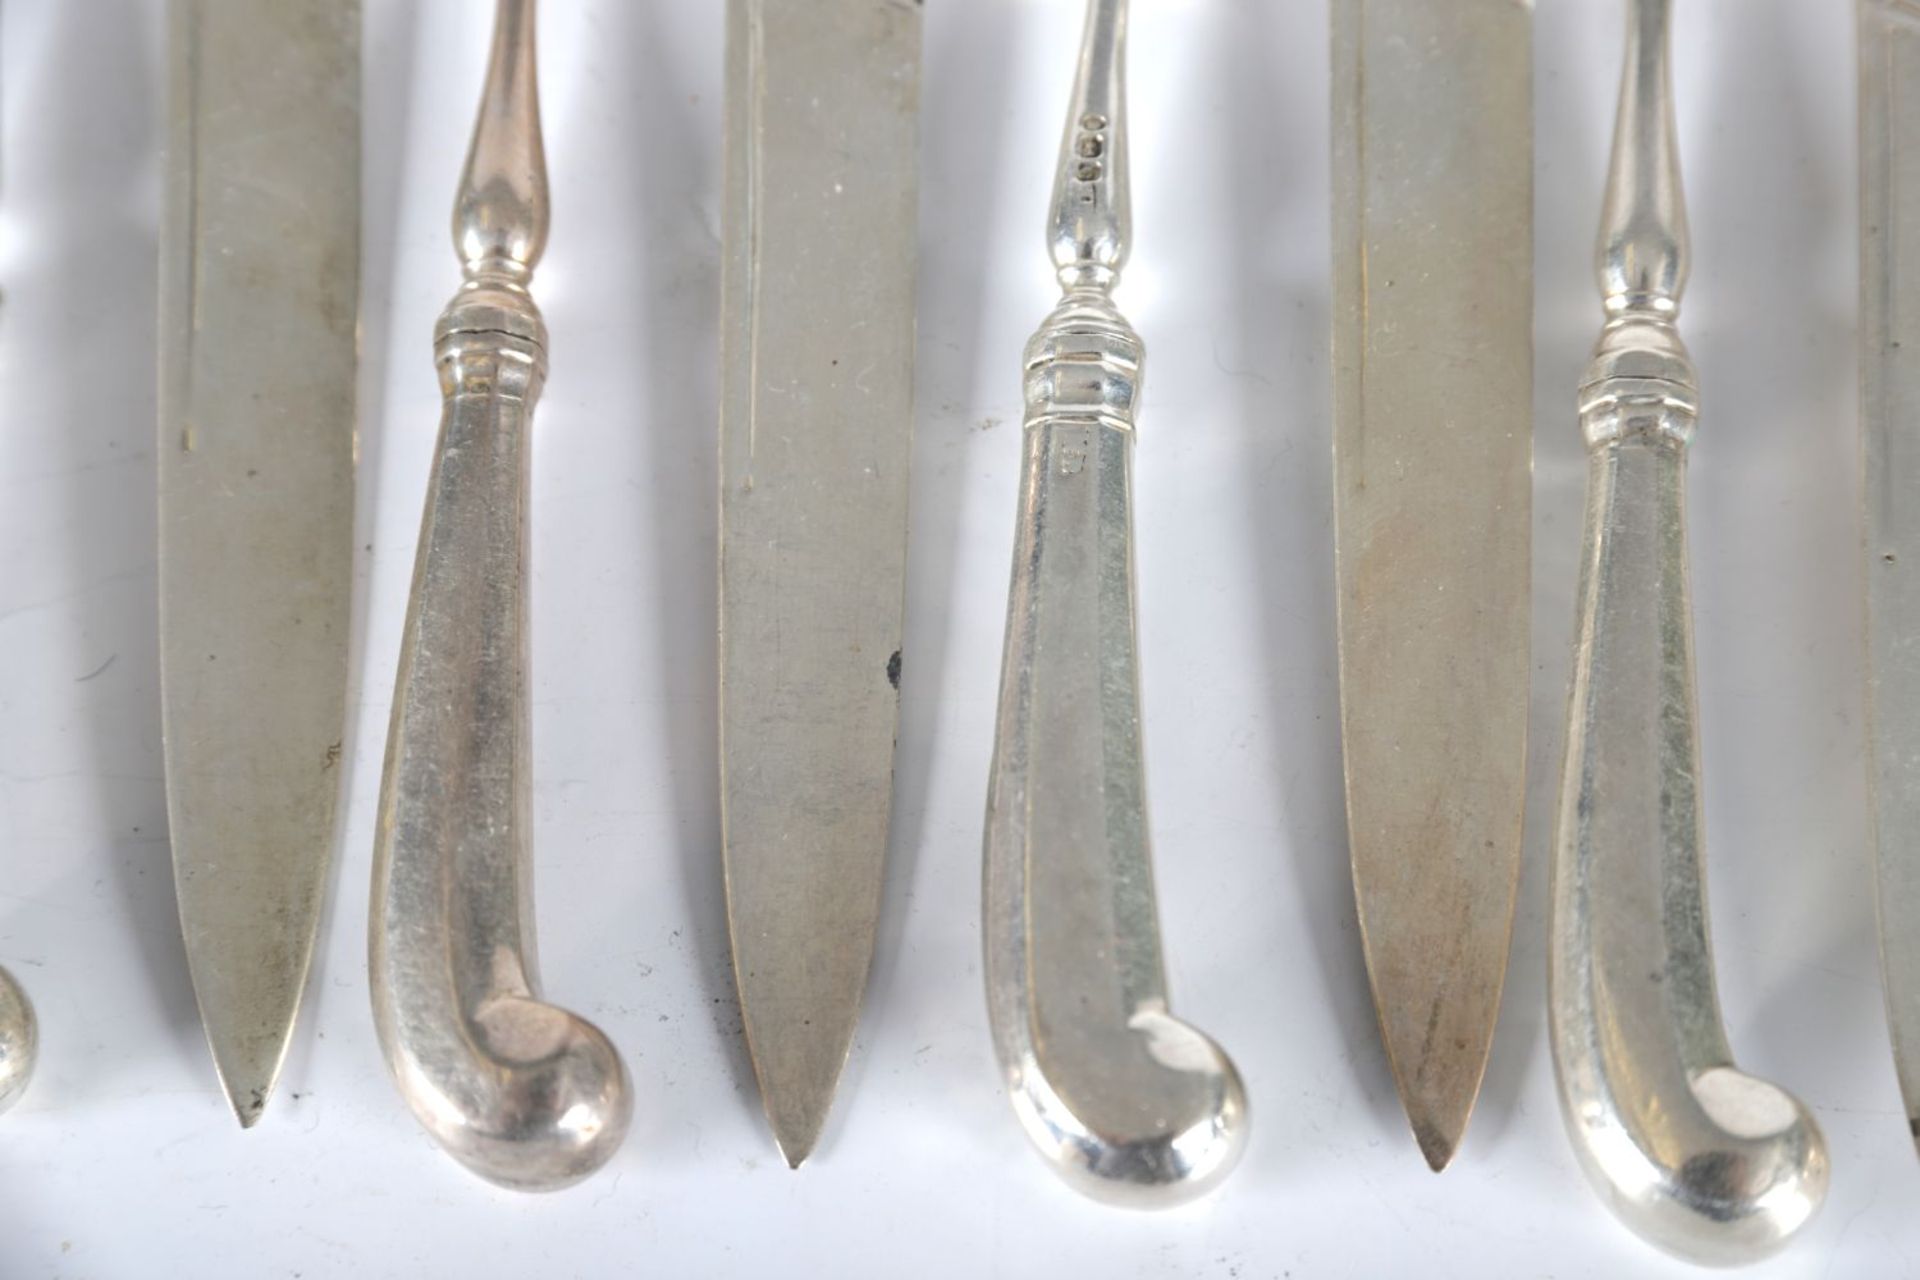 SET OF 15 SILVER FRUIT KNIVES AND FORKS - Image 3 of 3